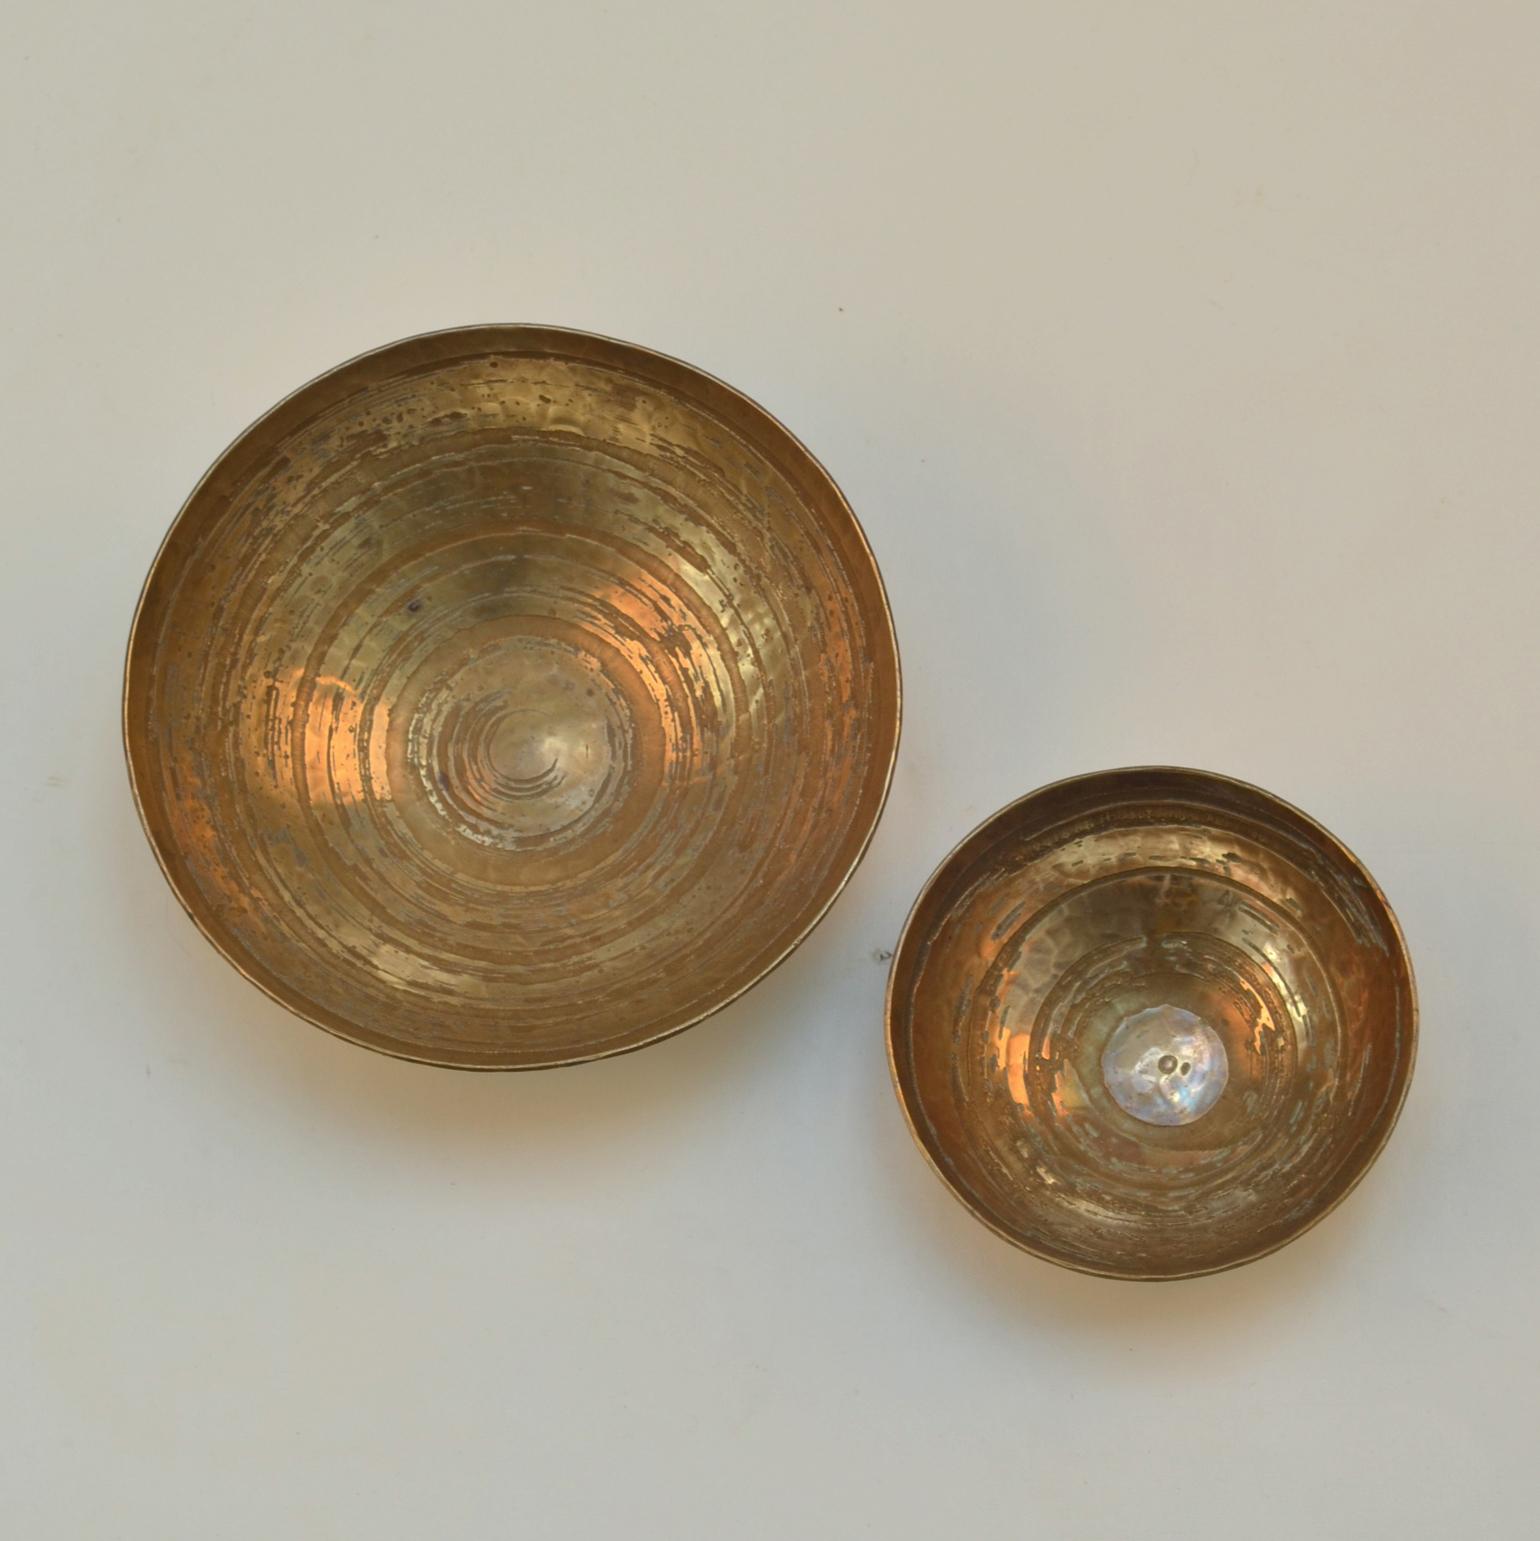 Etched Bronze Bowls by Michael Harjes Metallkunst In Excellent Condition For Sale In London, GB